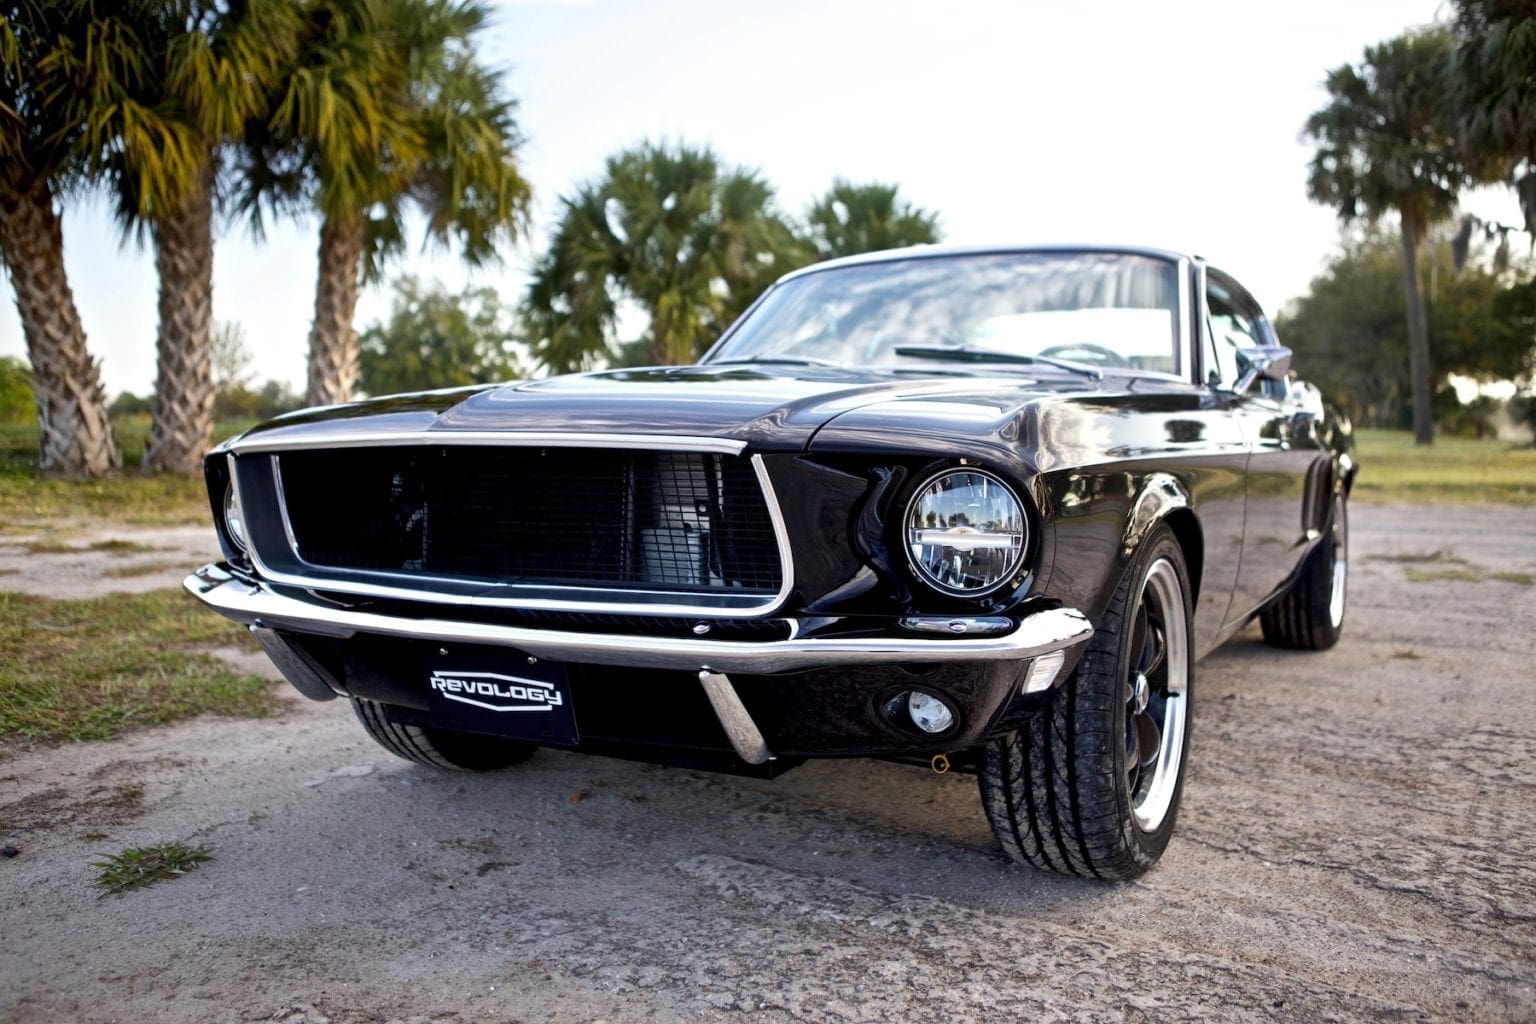 1968 Mustang GT 2+2 Fastback from Revology Cars